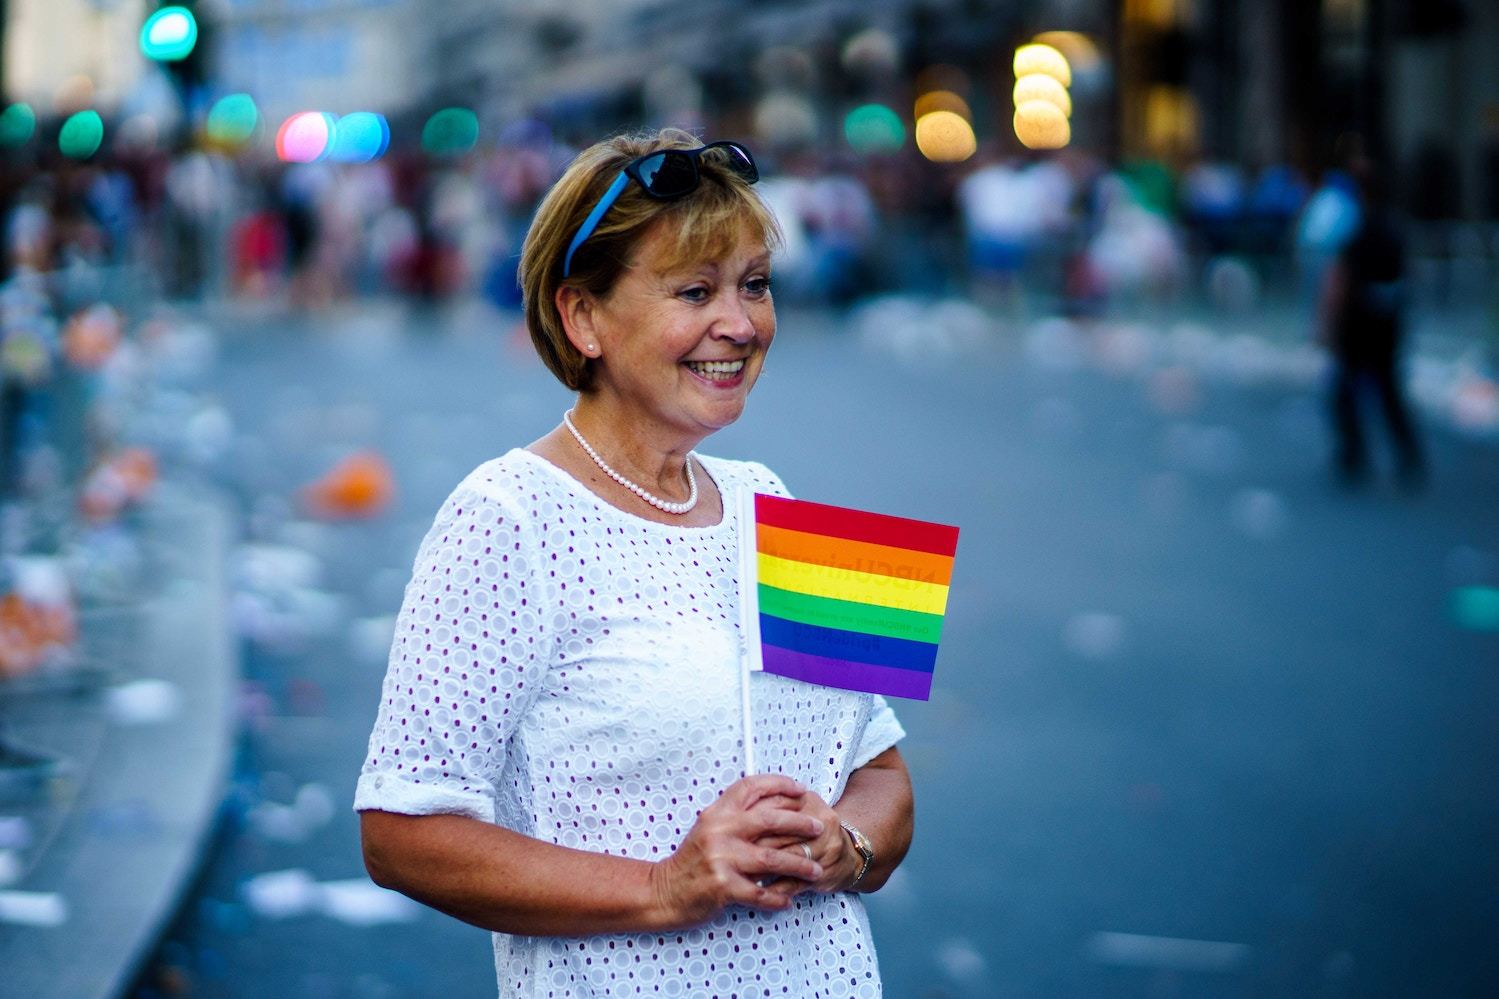 A woman holds a small rainbow flag in the aftermath of a parade